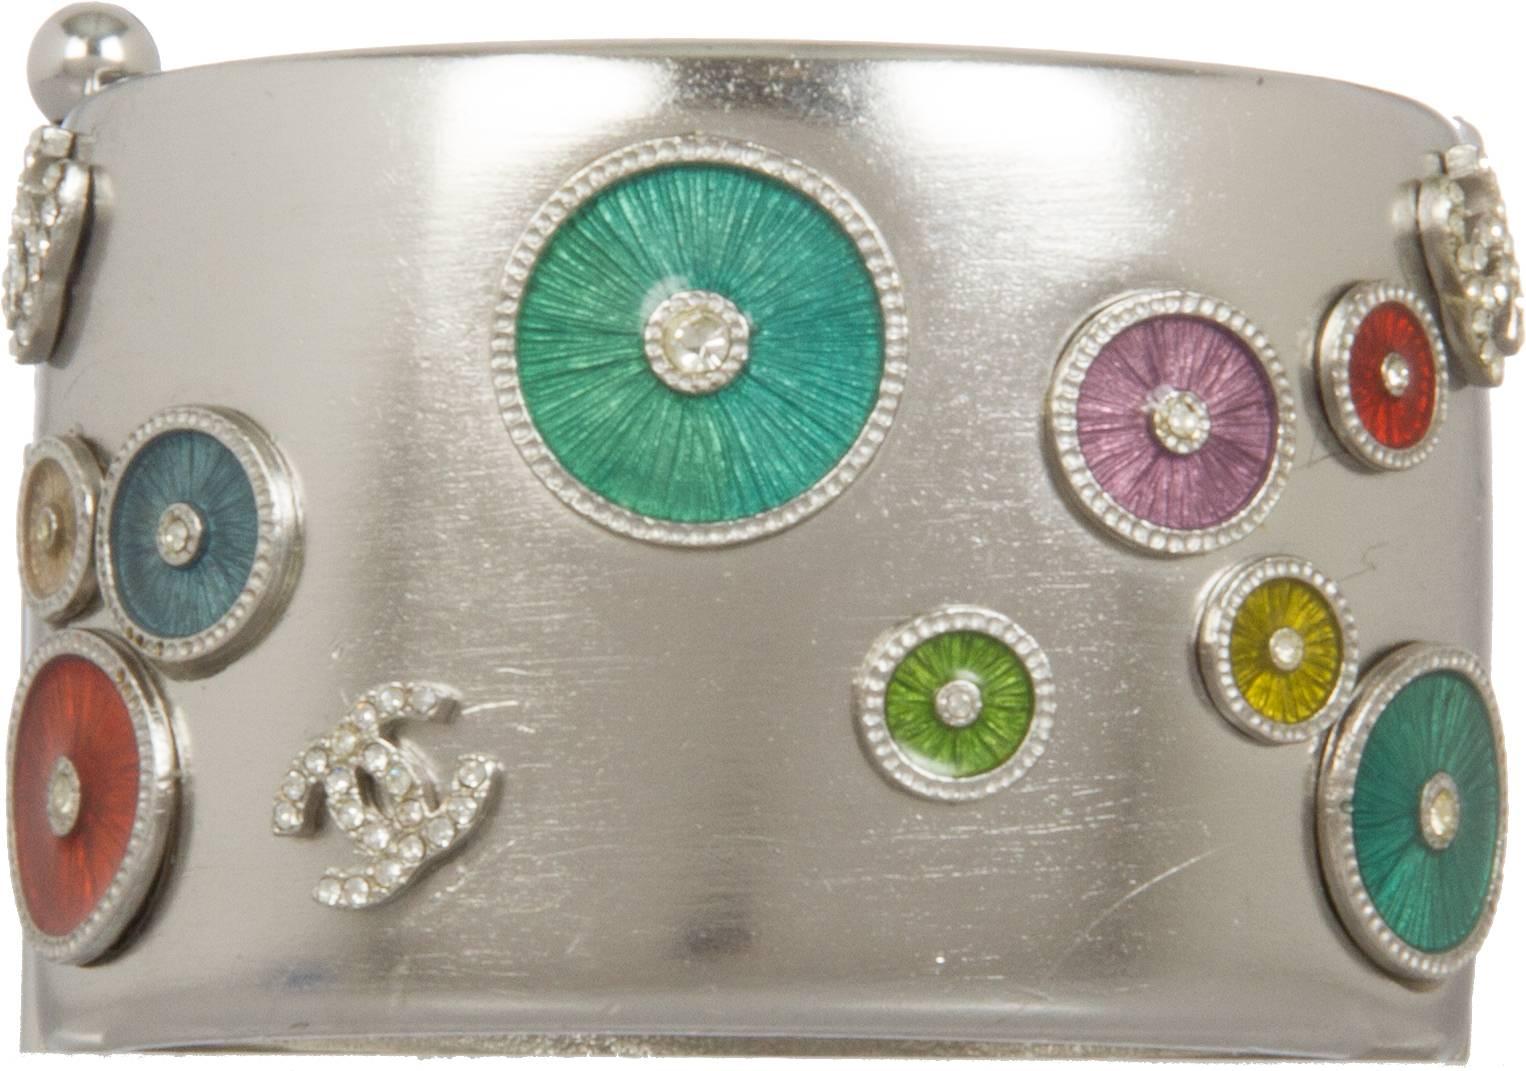 This is an unusual bracelet from the 2002 cruise collection. The interior dimension is 6.5